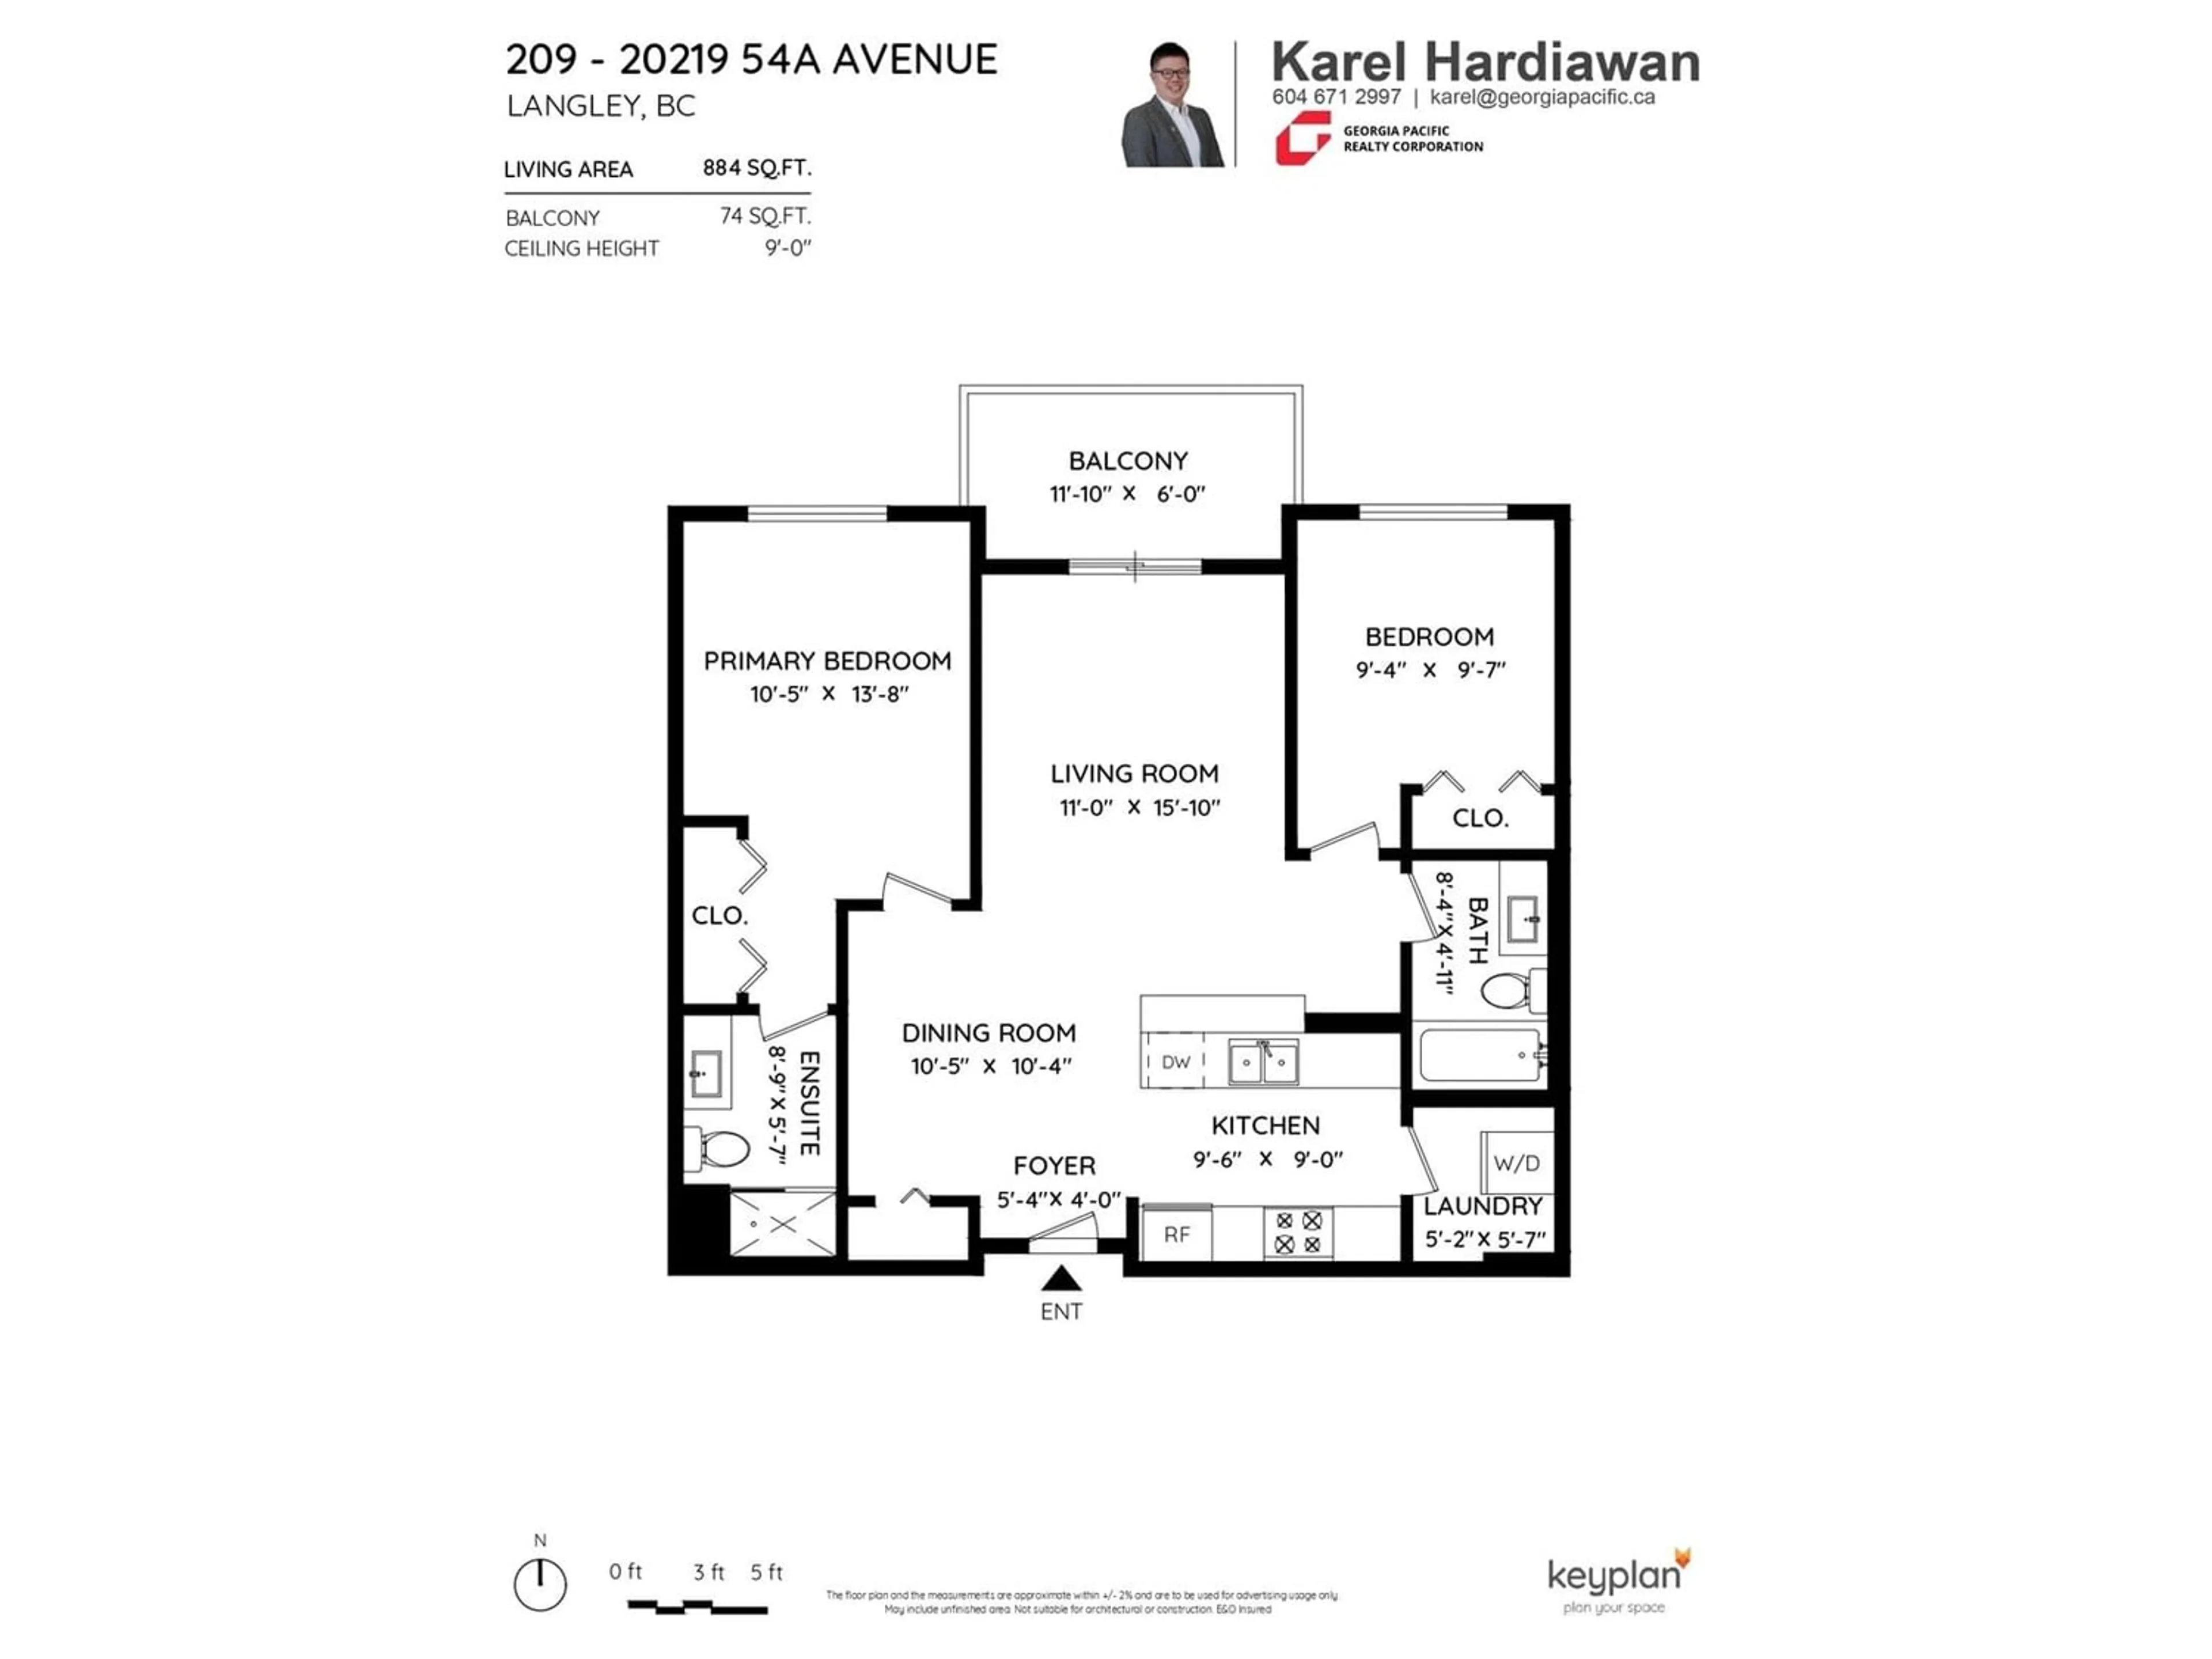 Floor plan for 209 20219 54A AVENUE, Langley British Columbia V3A0C7